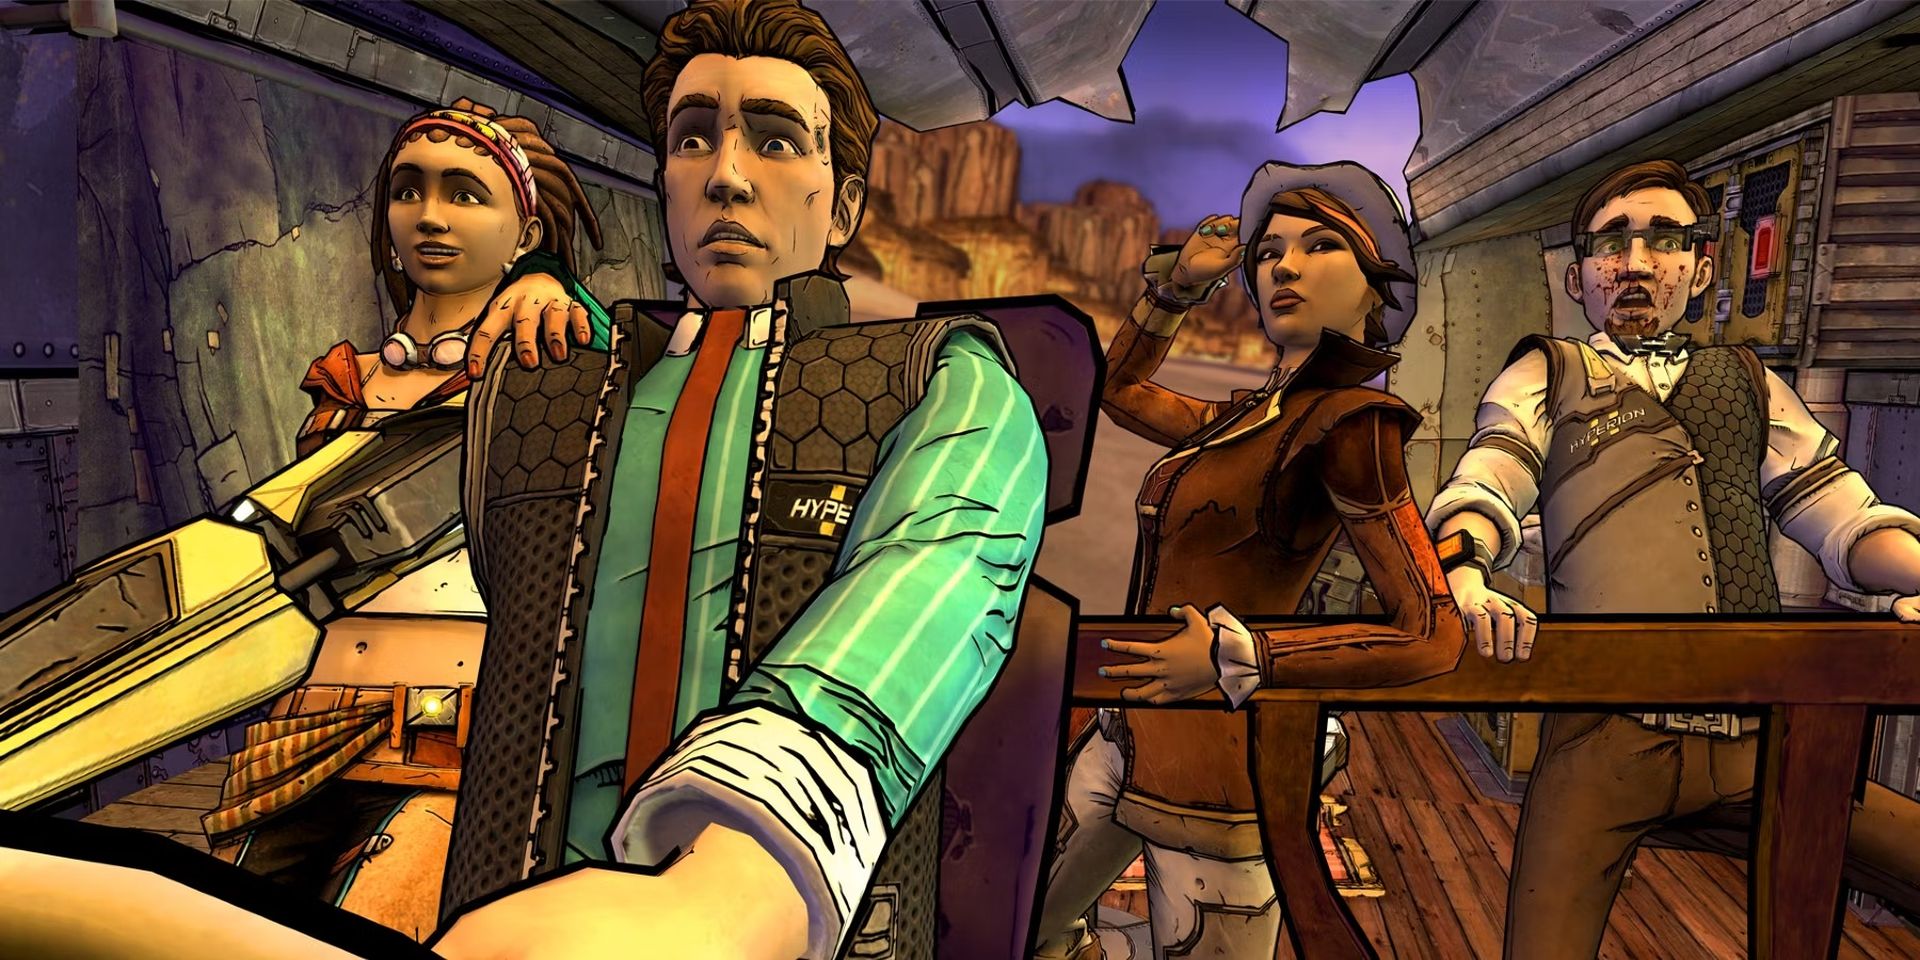 A lot of new information is now leaked about the upcoming Tales from the Borderlands season 2.